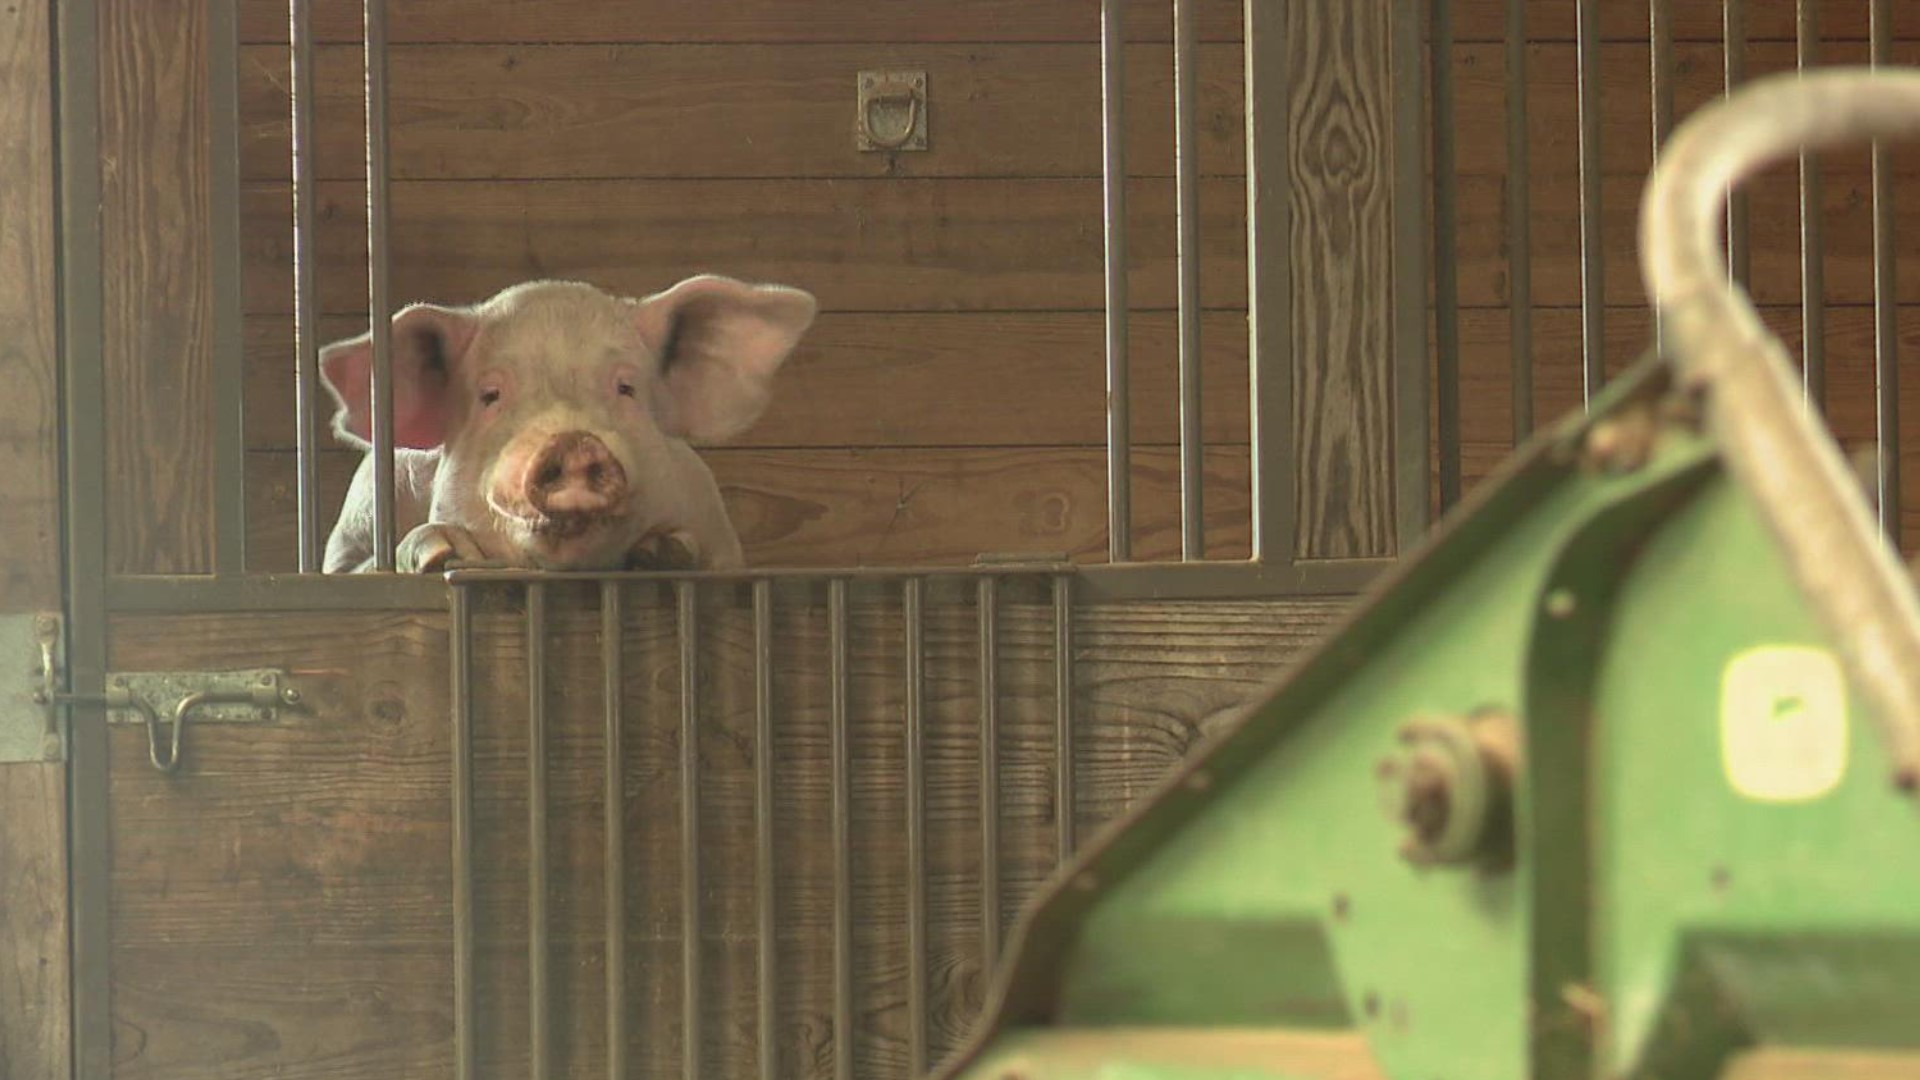 One of the St. Louis area's biggest social media influencers isn't a human. Rutabaga the pig is using his fame to bring attention to animal rescue.